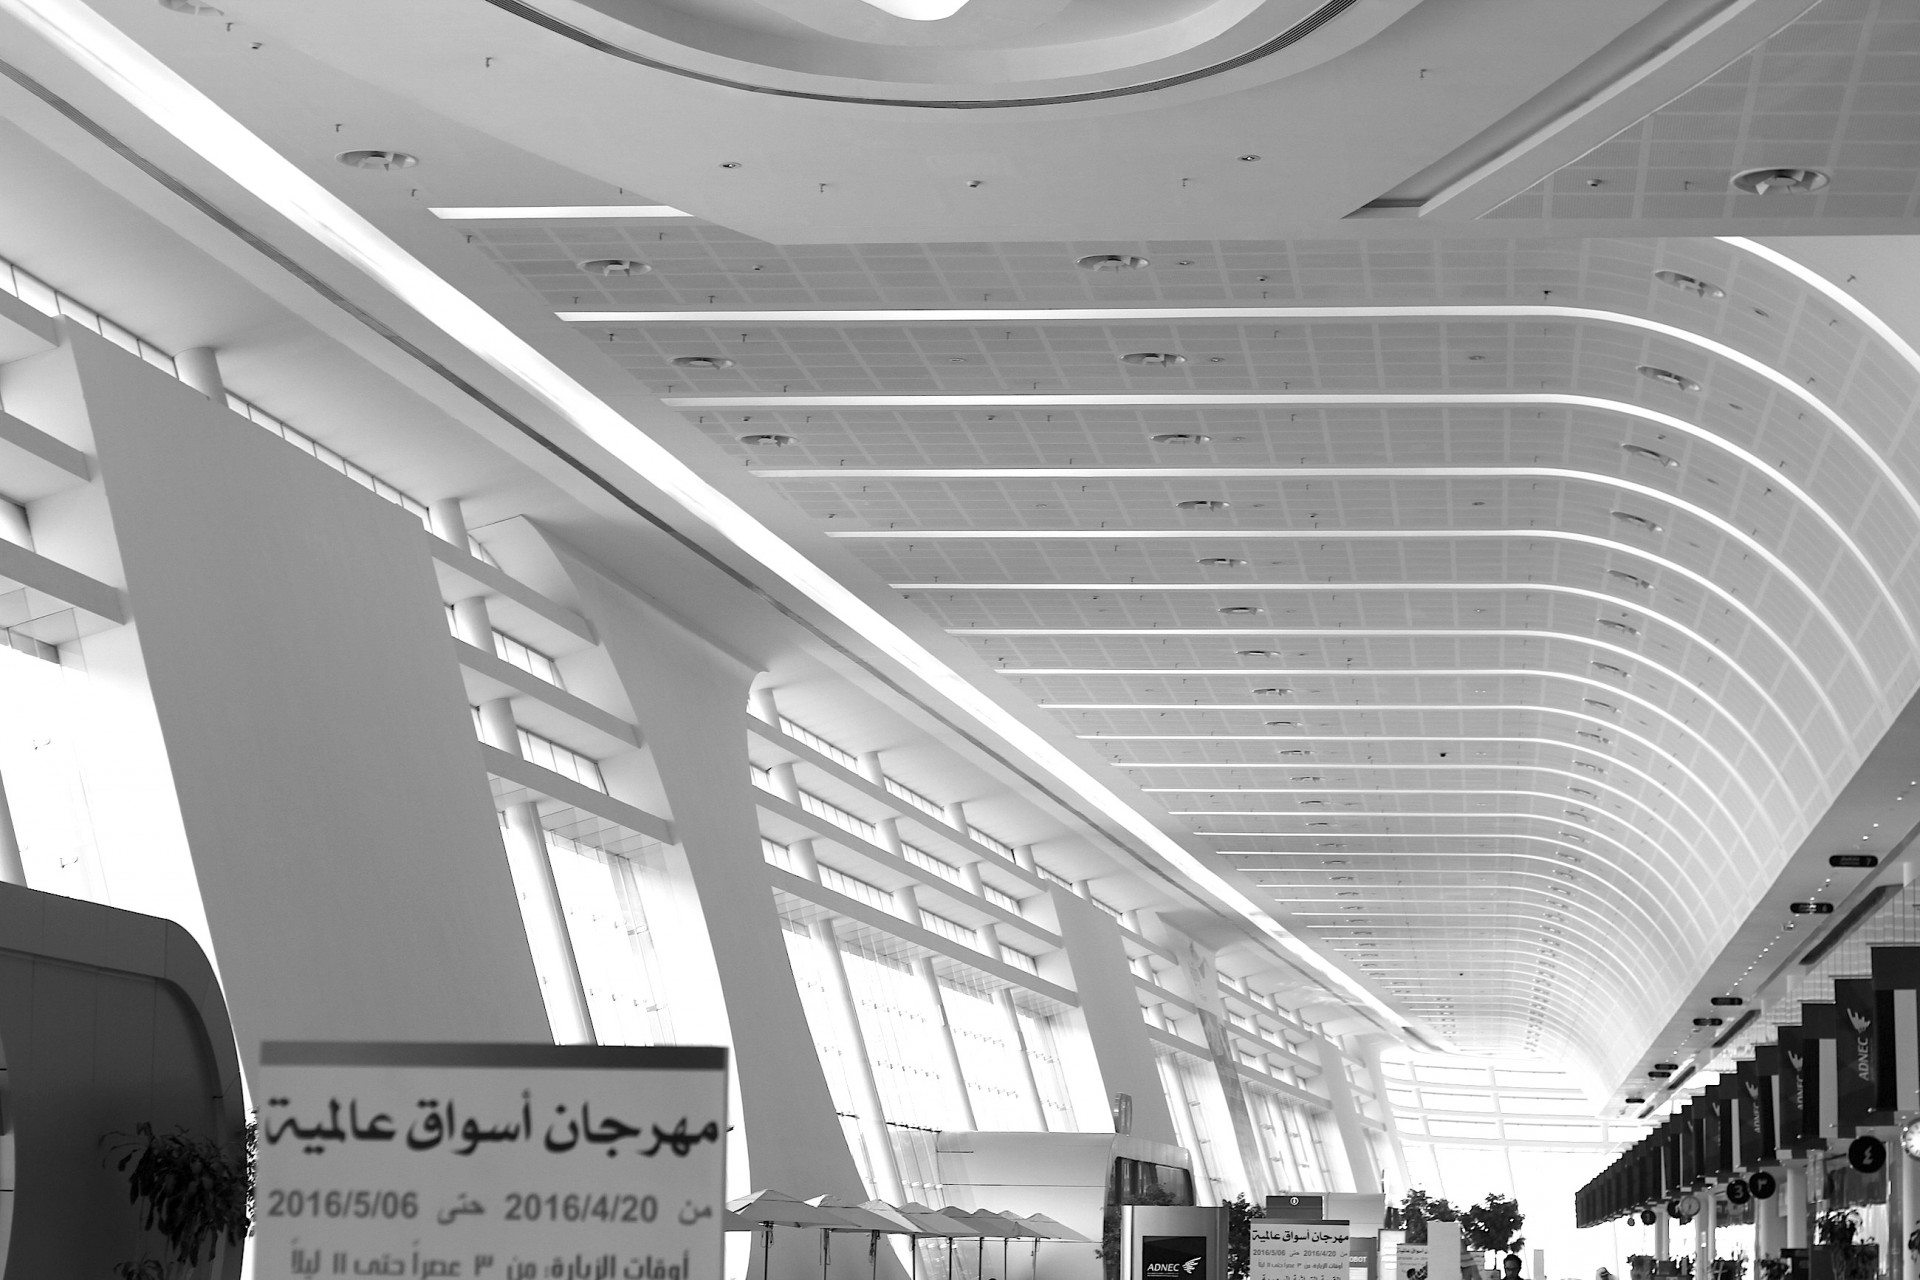 White and wide. The Abu Dhabi National Exhibition Centre, host of the Abu Dhabi International Book Fair